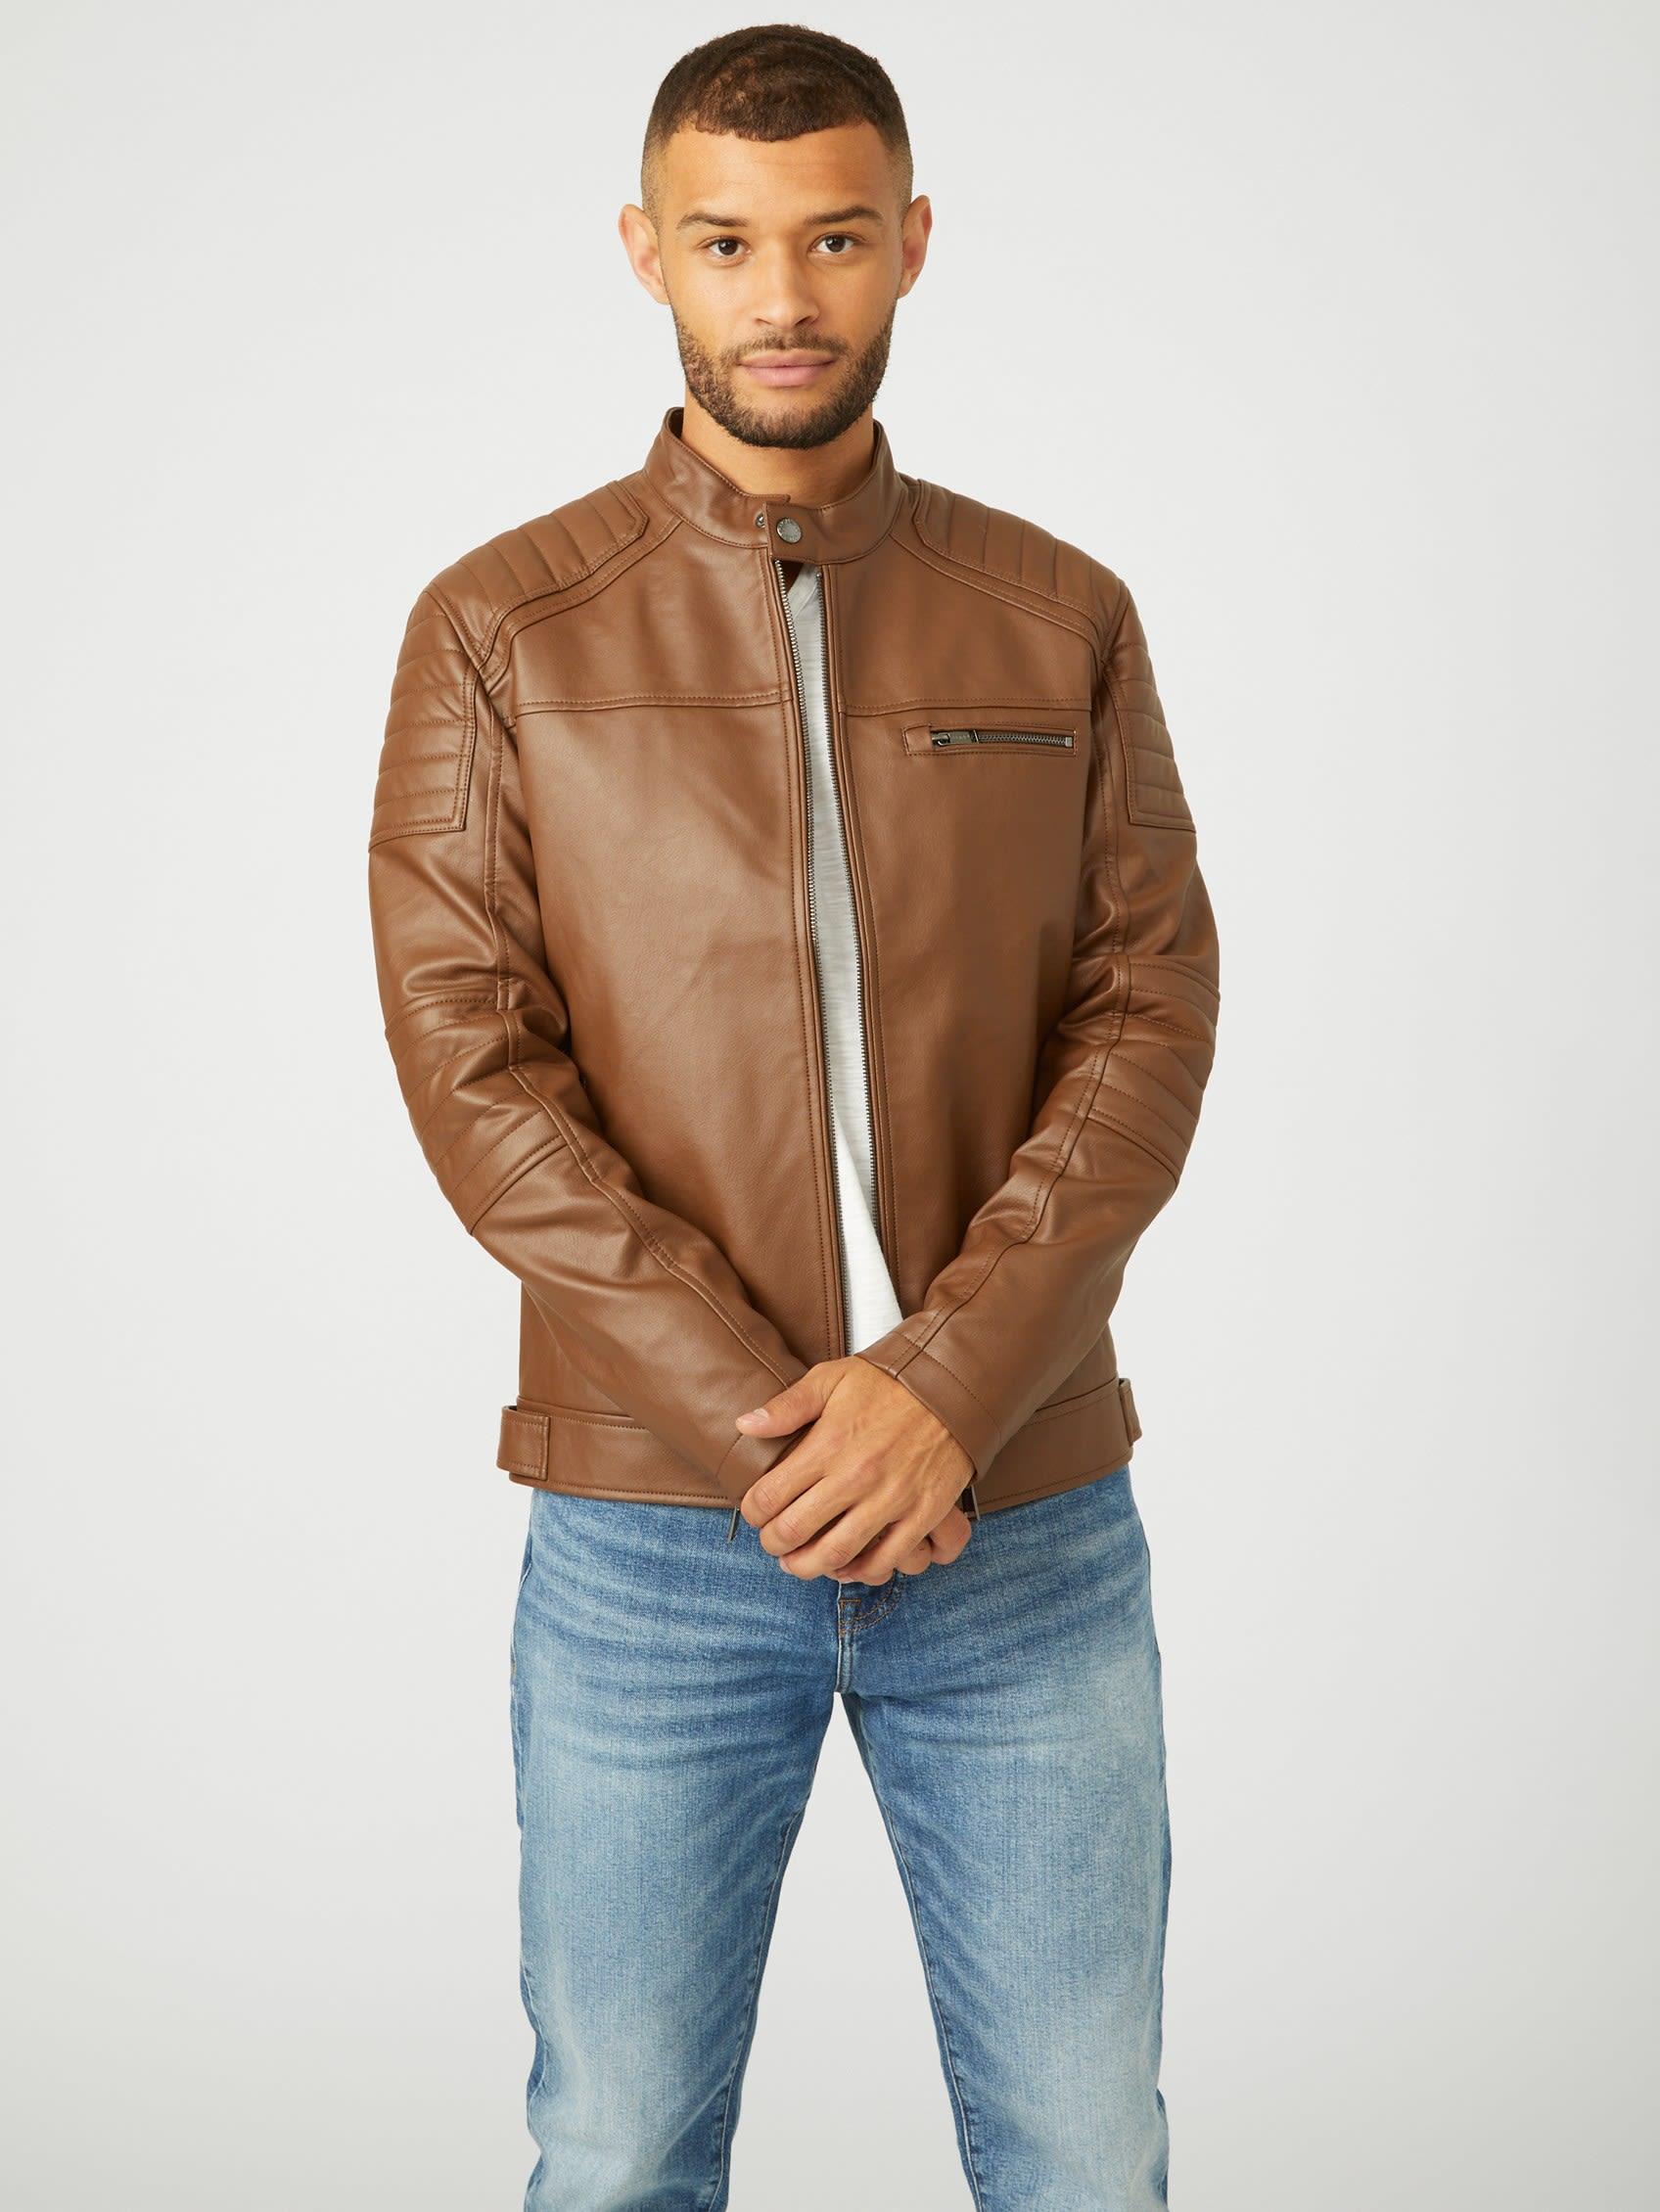 Guess Factory Daniel Faux-leather Biker Jacket in Natural for Men | Lyst